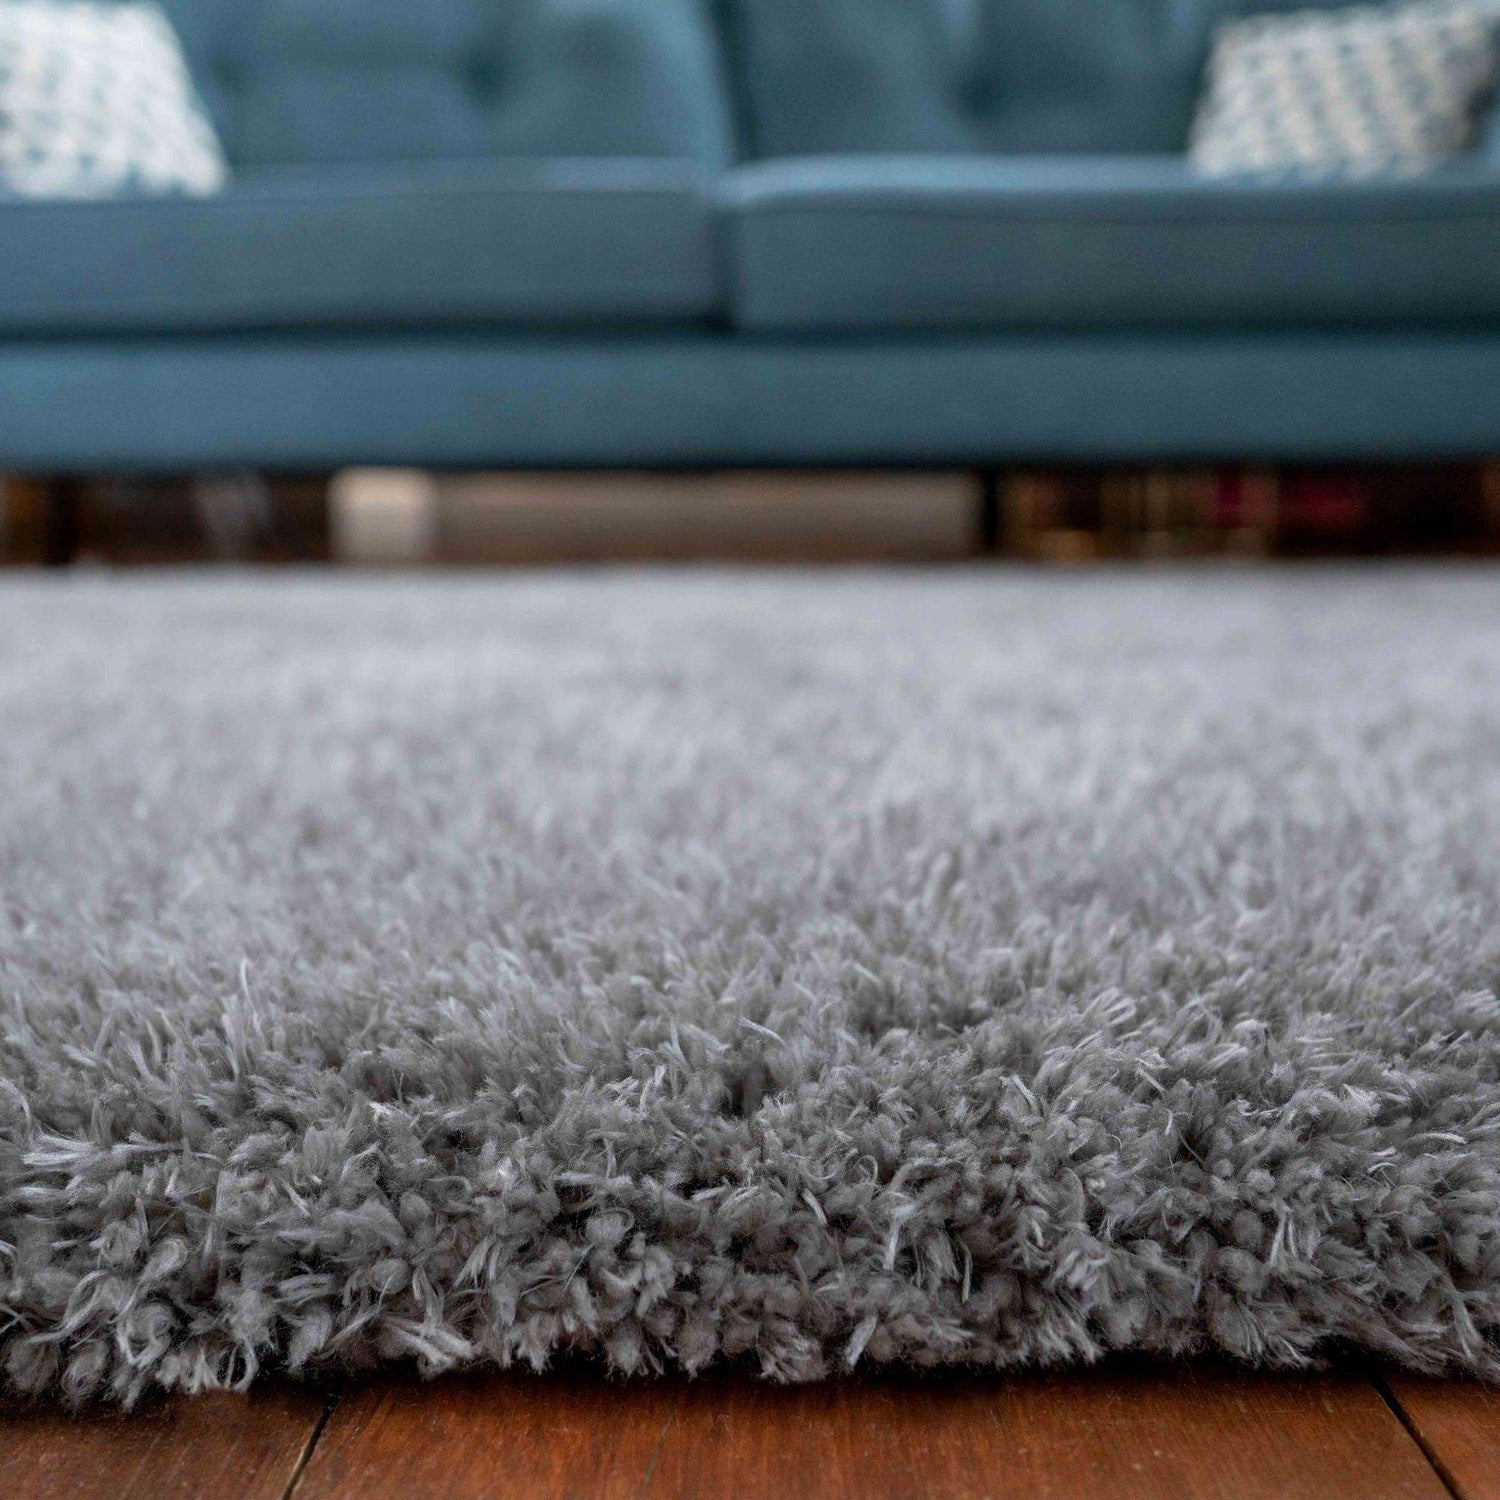 Deluxe Thick Soft Silver Grey Shaggy Living Room Rug